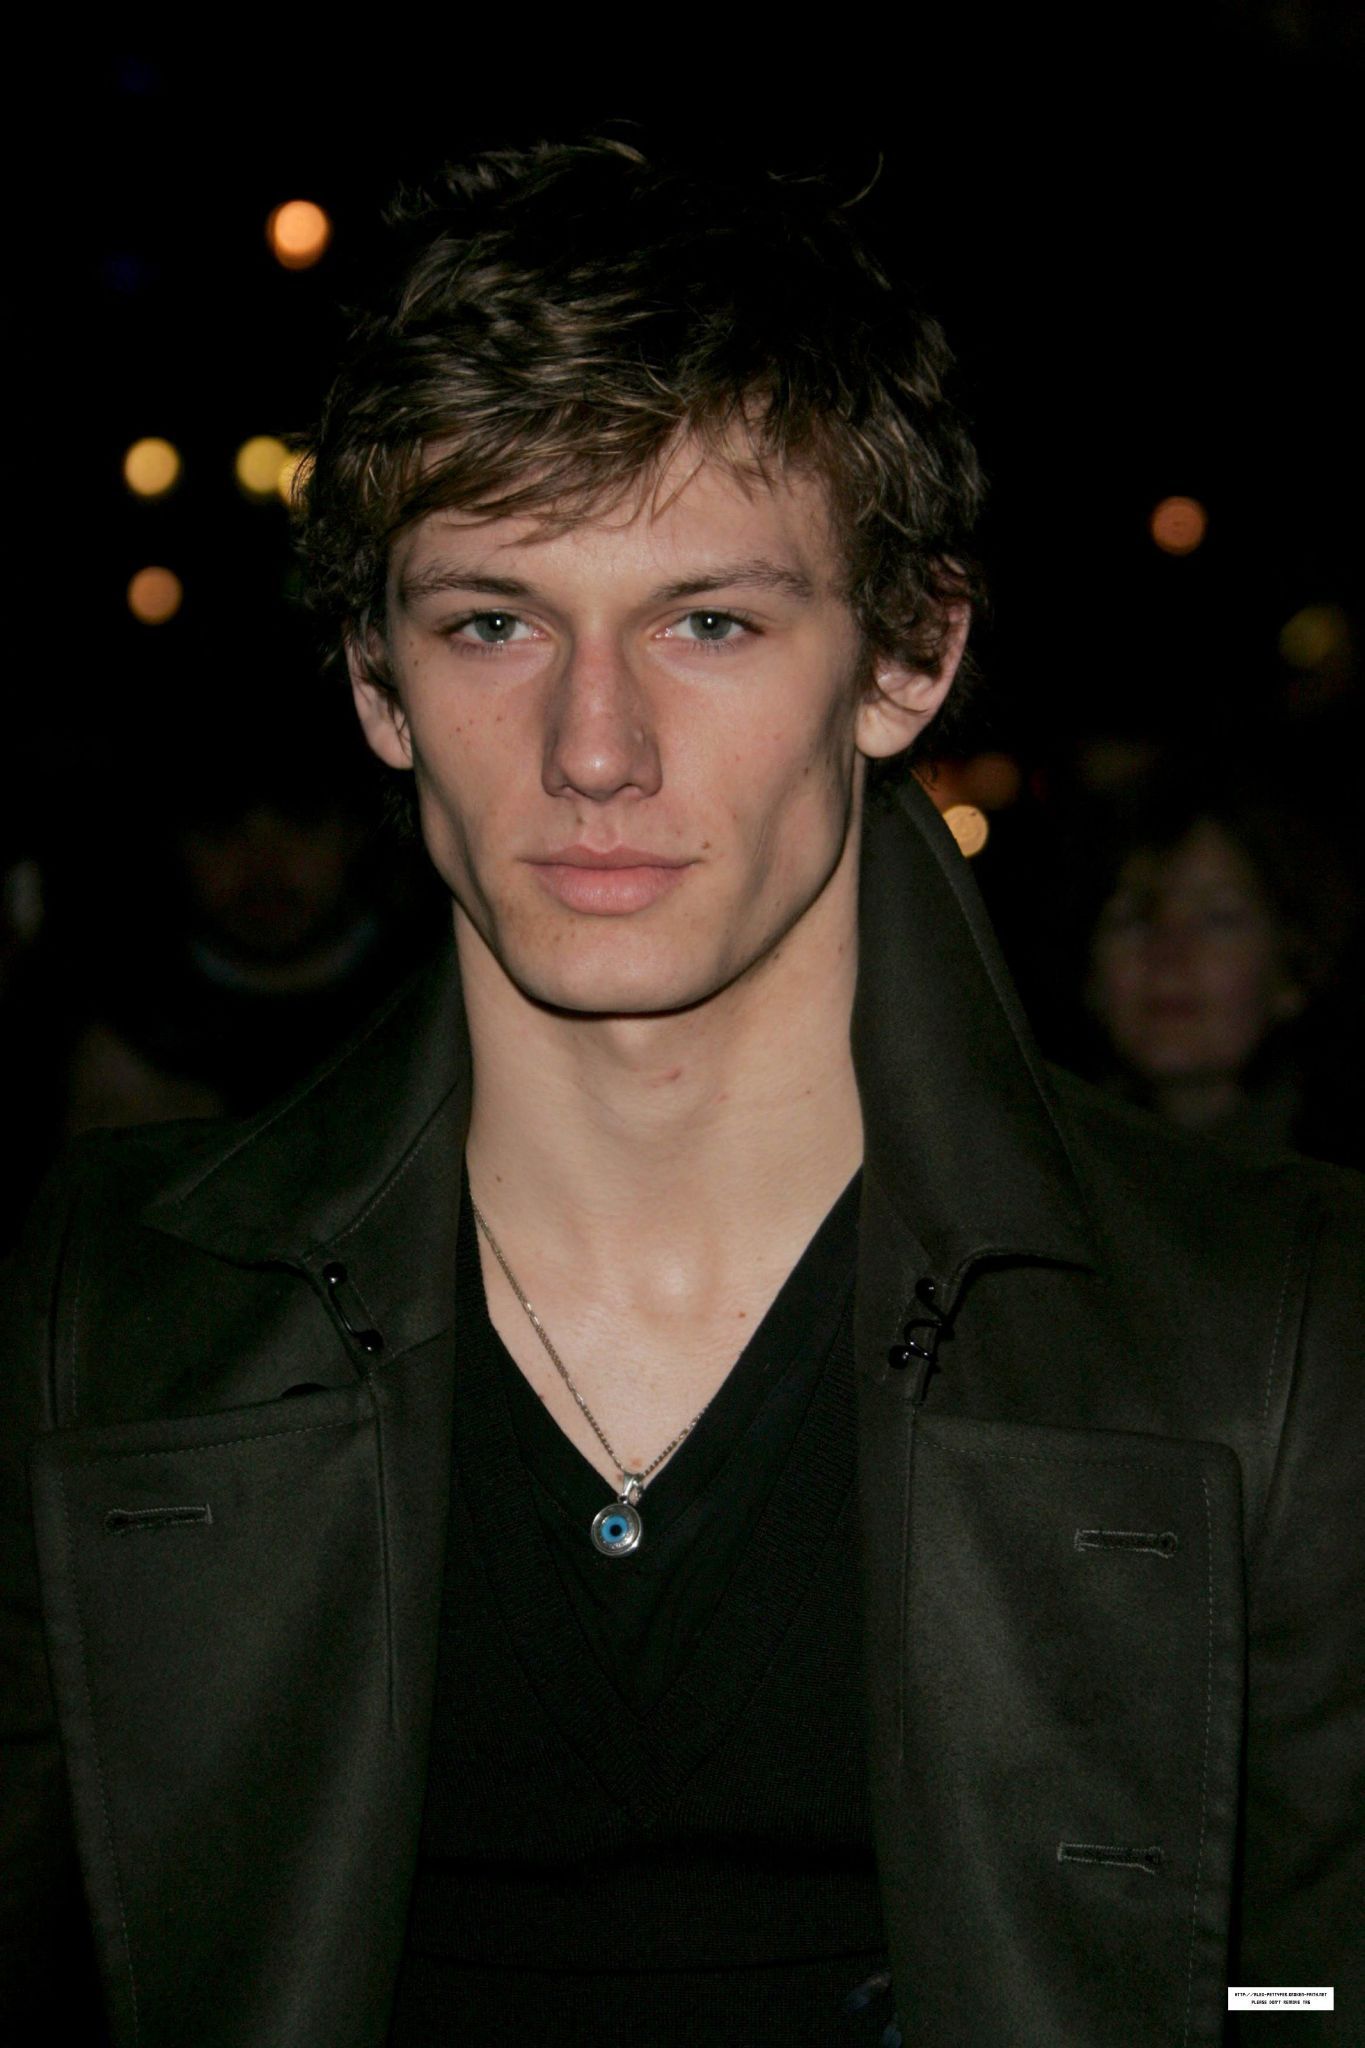 Alex Pettyfer - Images Actress